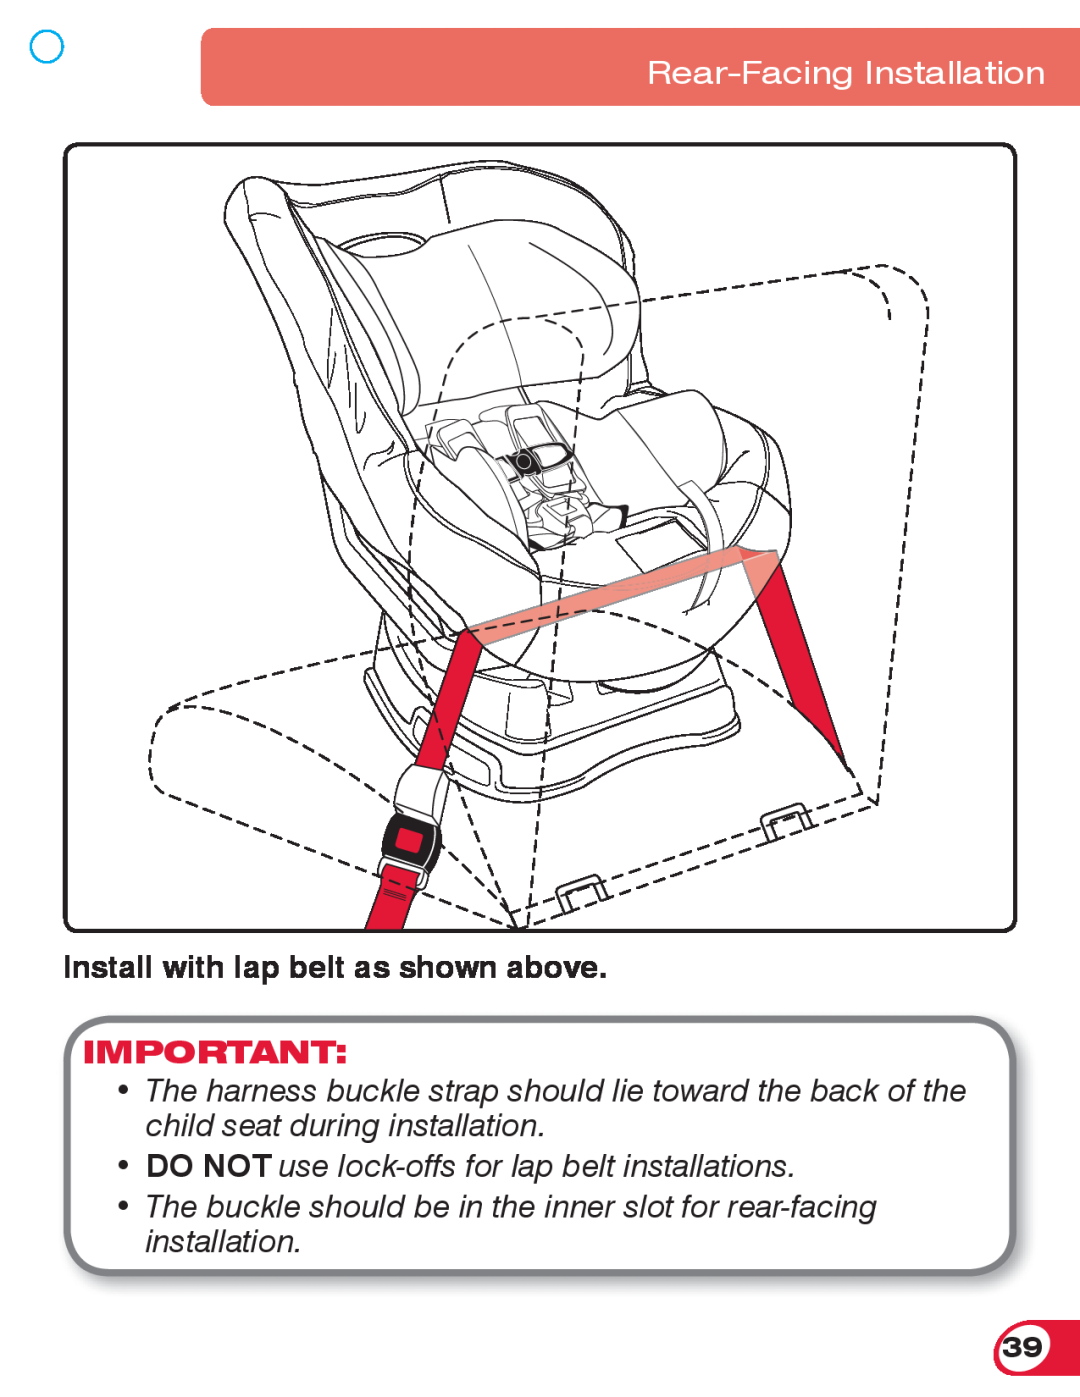 Britax 70 CS manual Install with lap belt as shown above, Rear-Facing Installation 